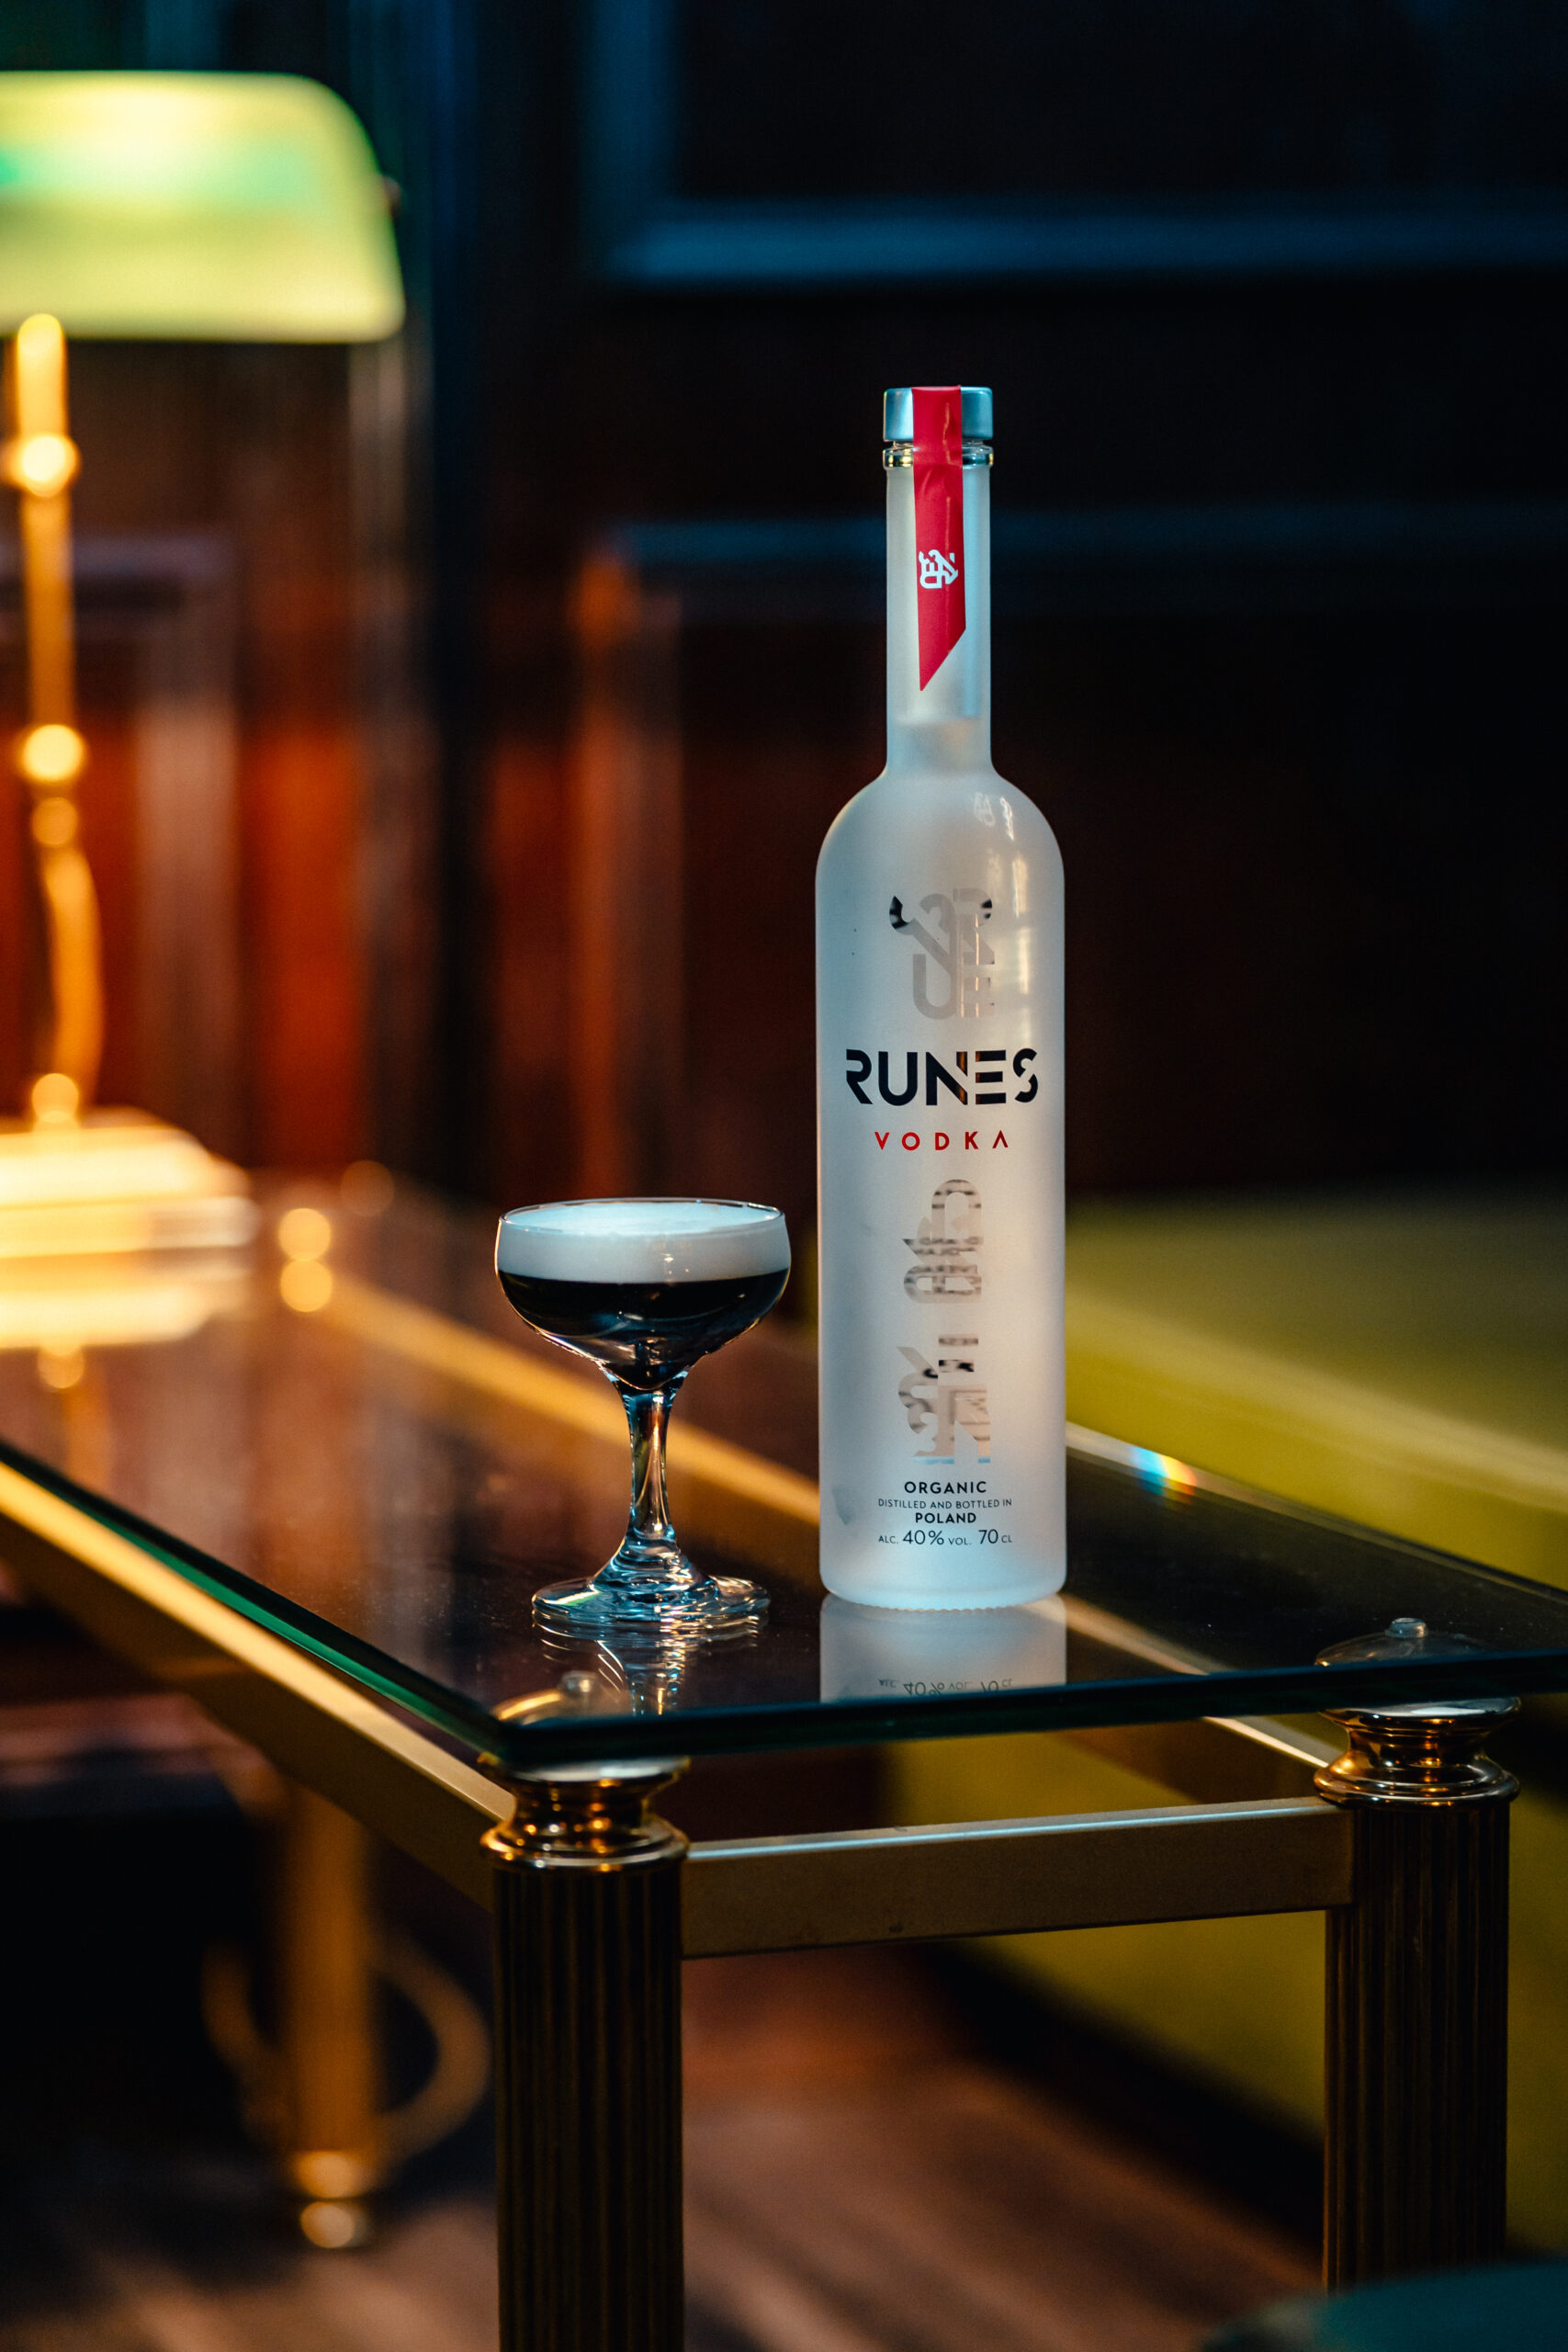 White Russian is a cocktail made of RUNES vodka, coffee liqueur and cream or milk. Due to its sweet and creamy ingredients, the short drink is one of the after-dinner drinks